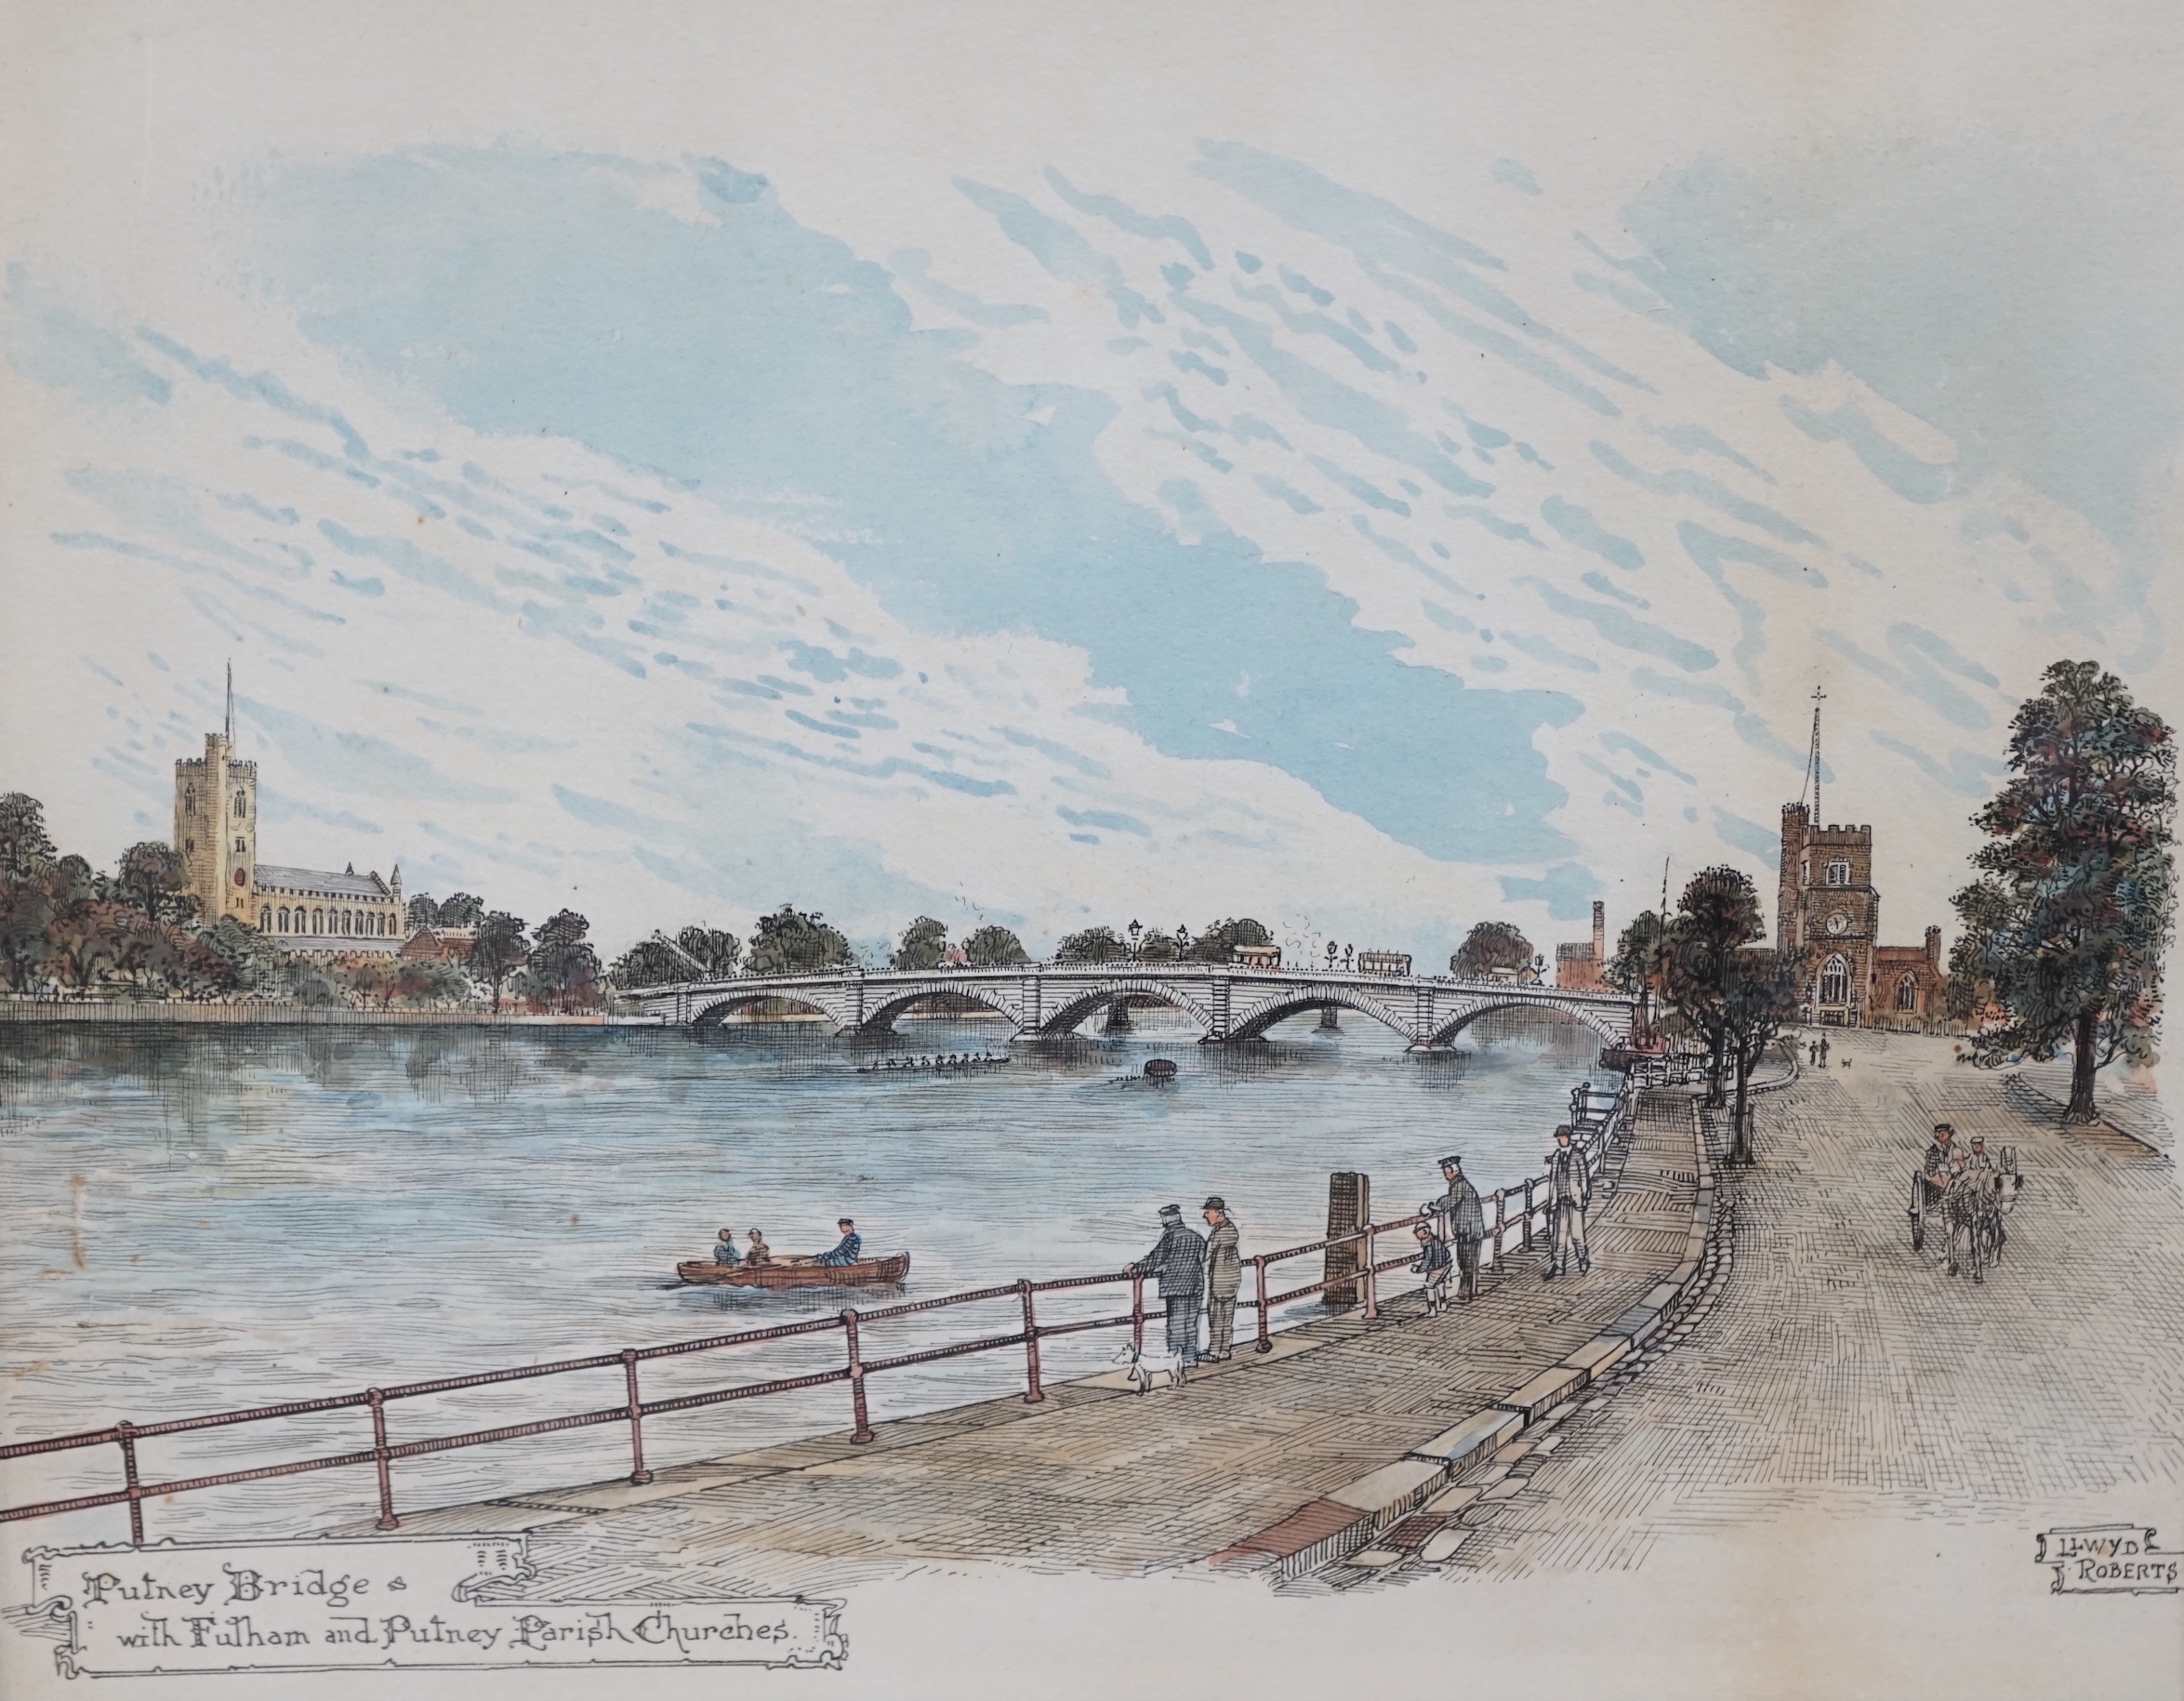 Llwyd Roberts (1875-1940), ink and watercolour, Putney Bridge with Fulham and Putney Parish Churches, signed and inscribed, unframed, 23 x 27cm